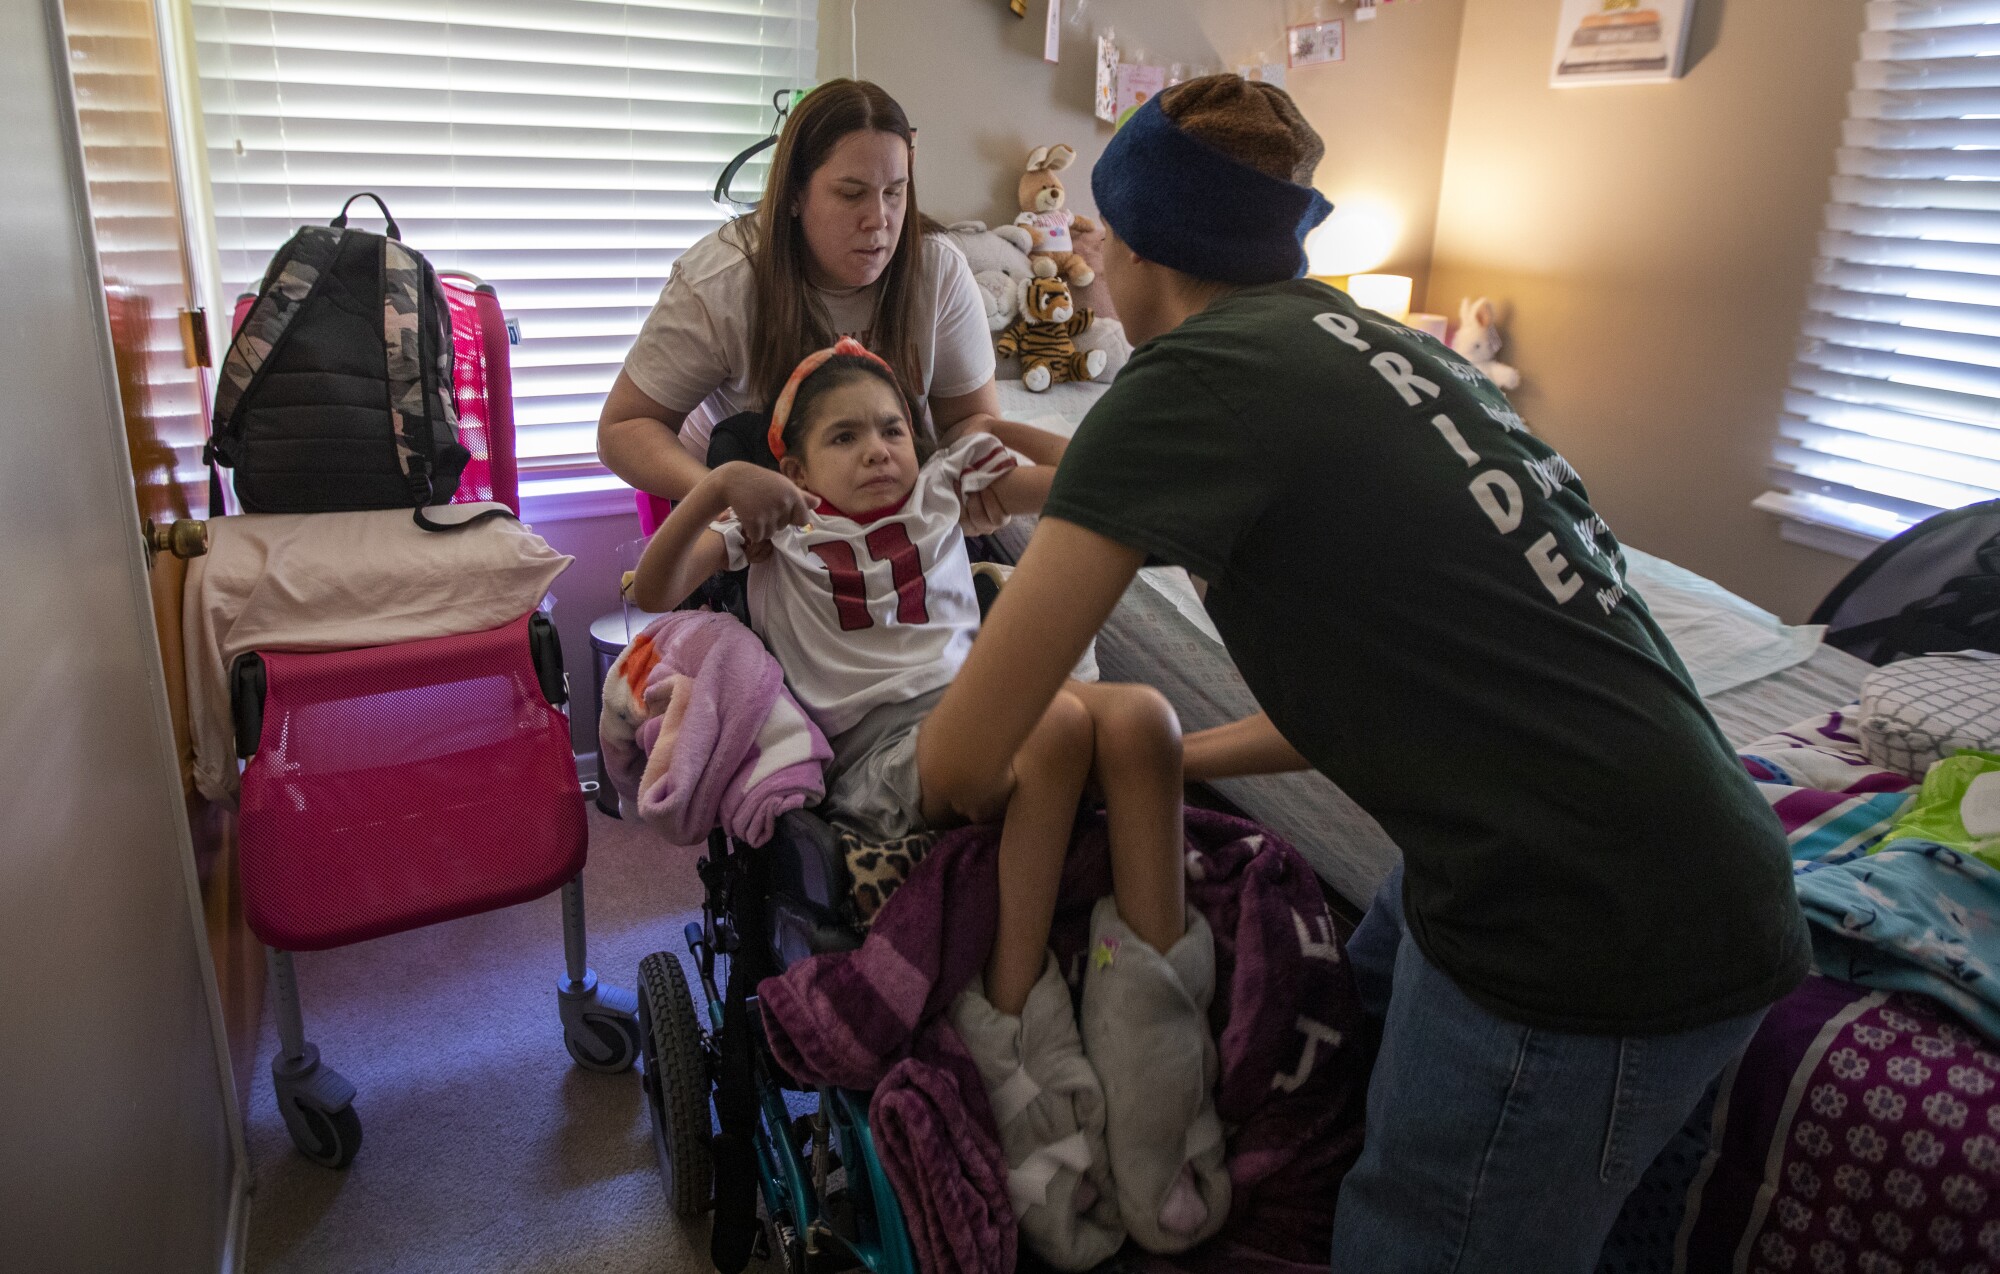 Penny Lopez, left, lifts her daughter Hannah, with help from her son Lucas.